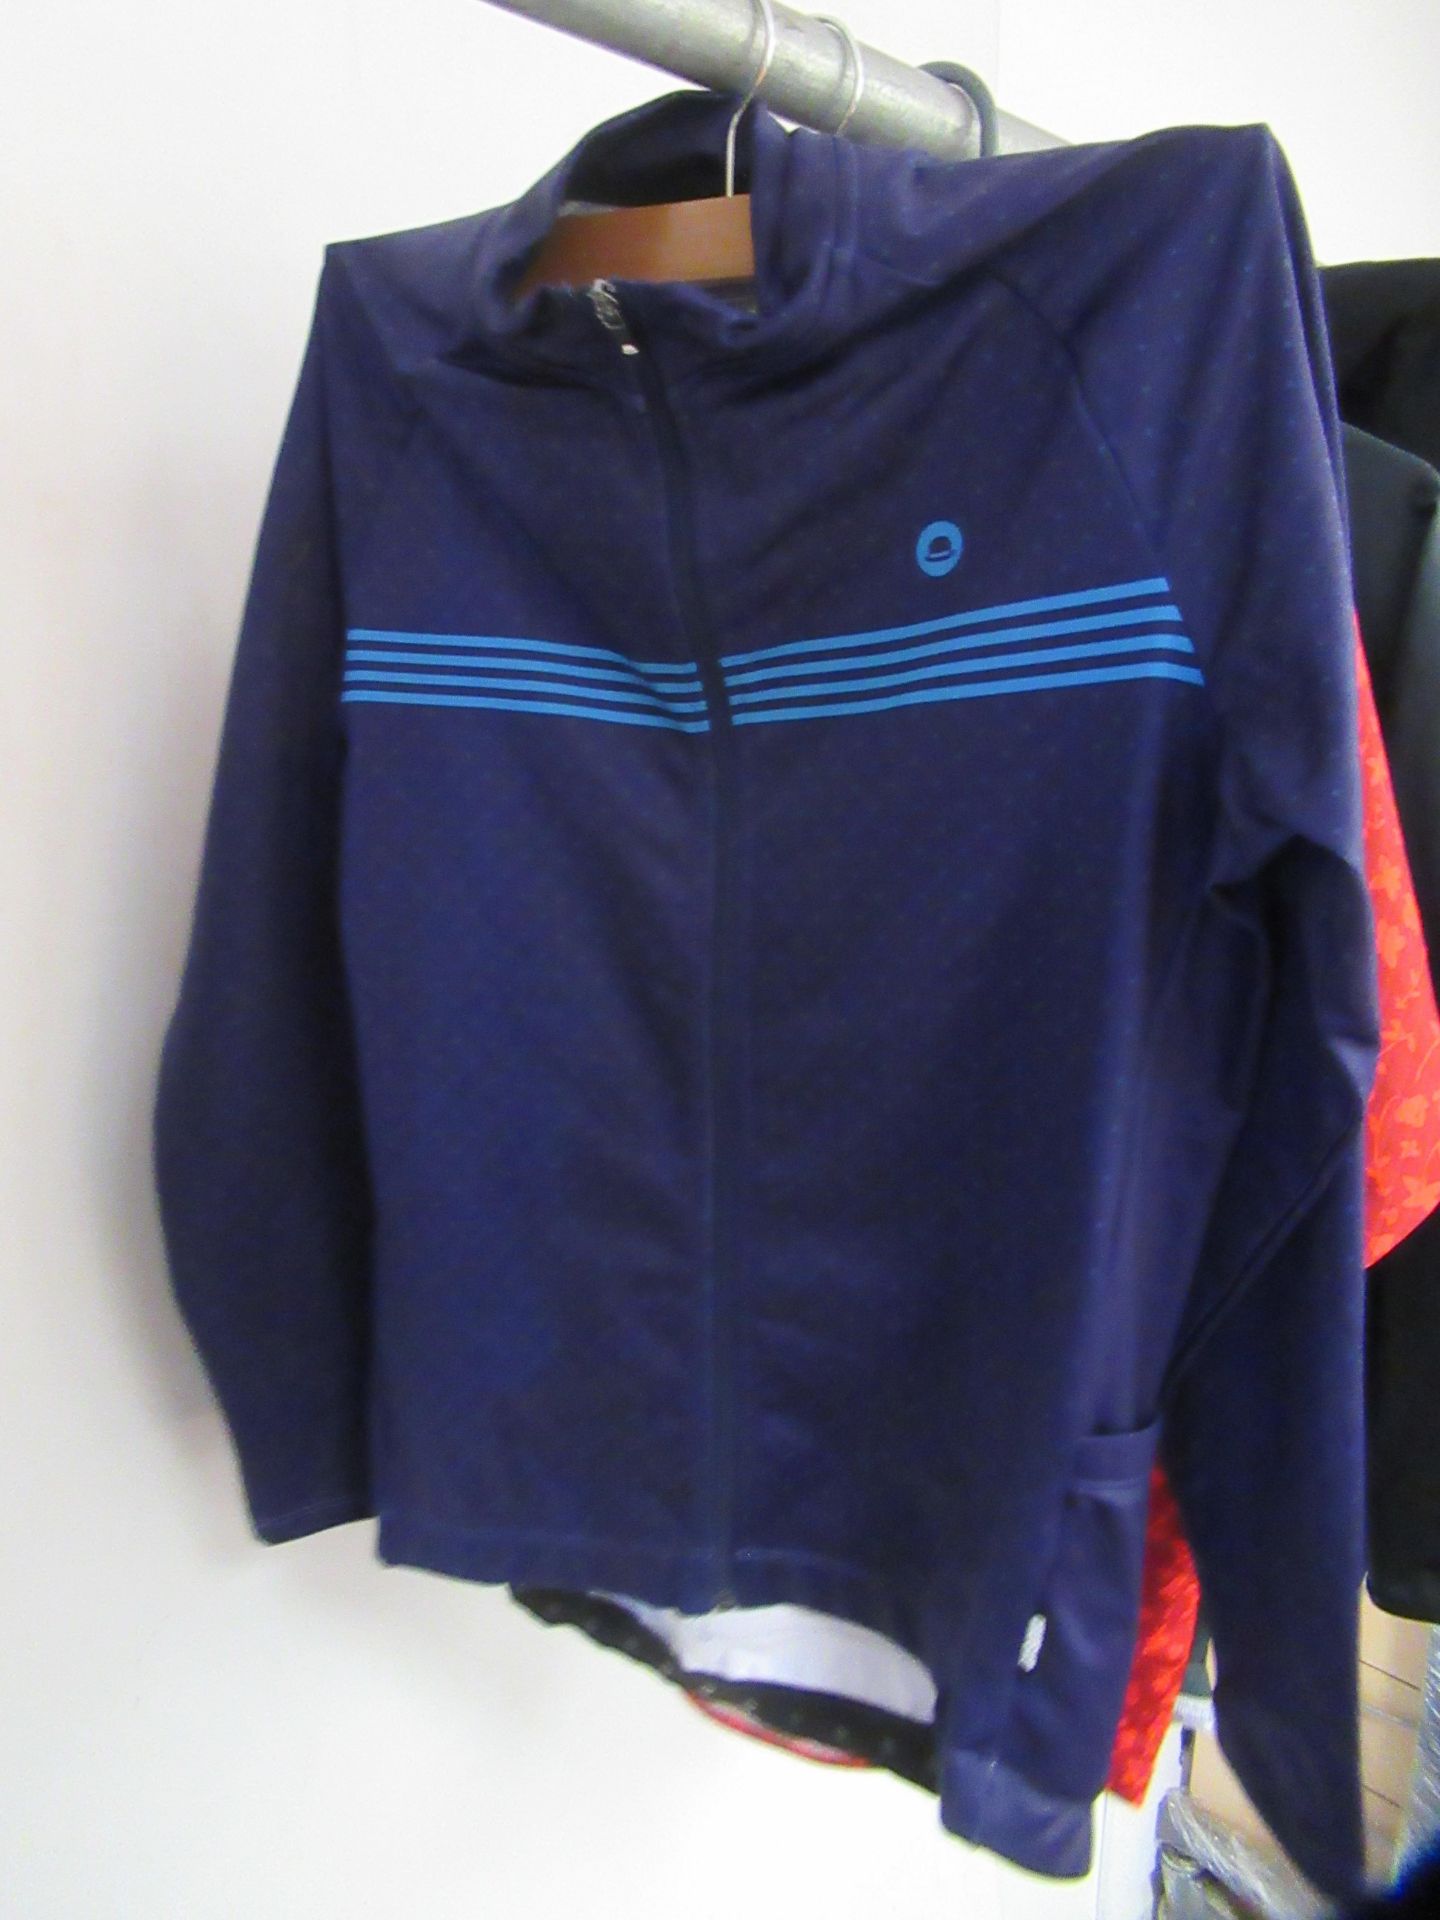 L Womens Cycling Clothes - Image 3 of 6